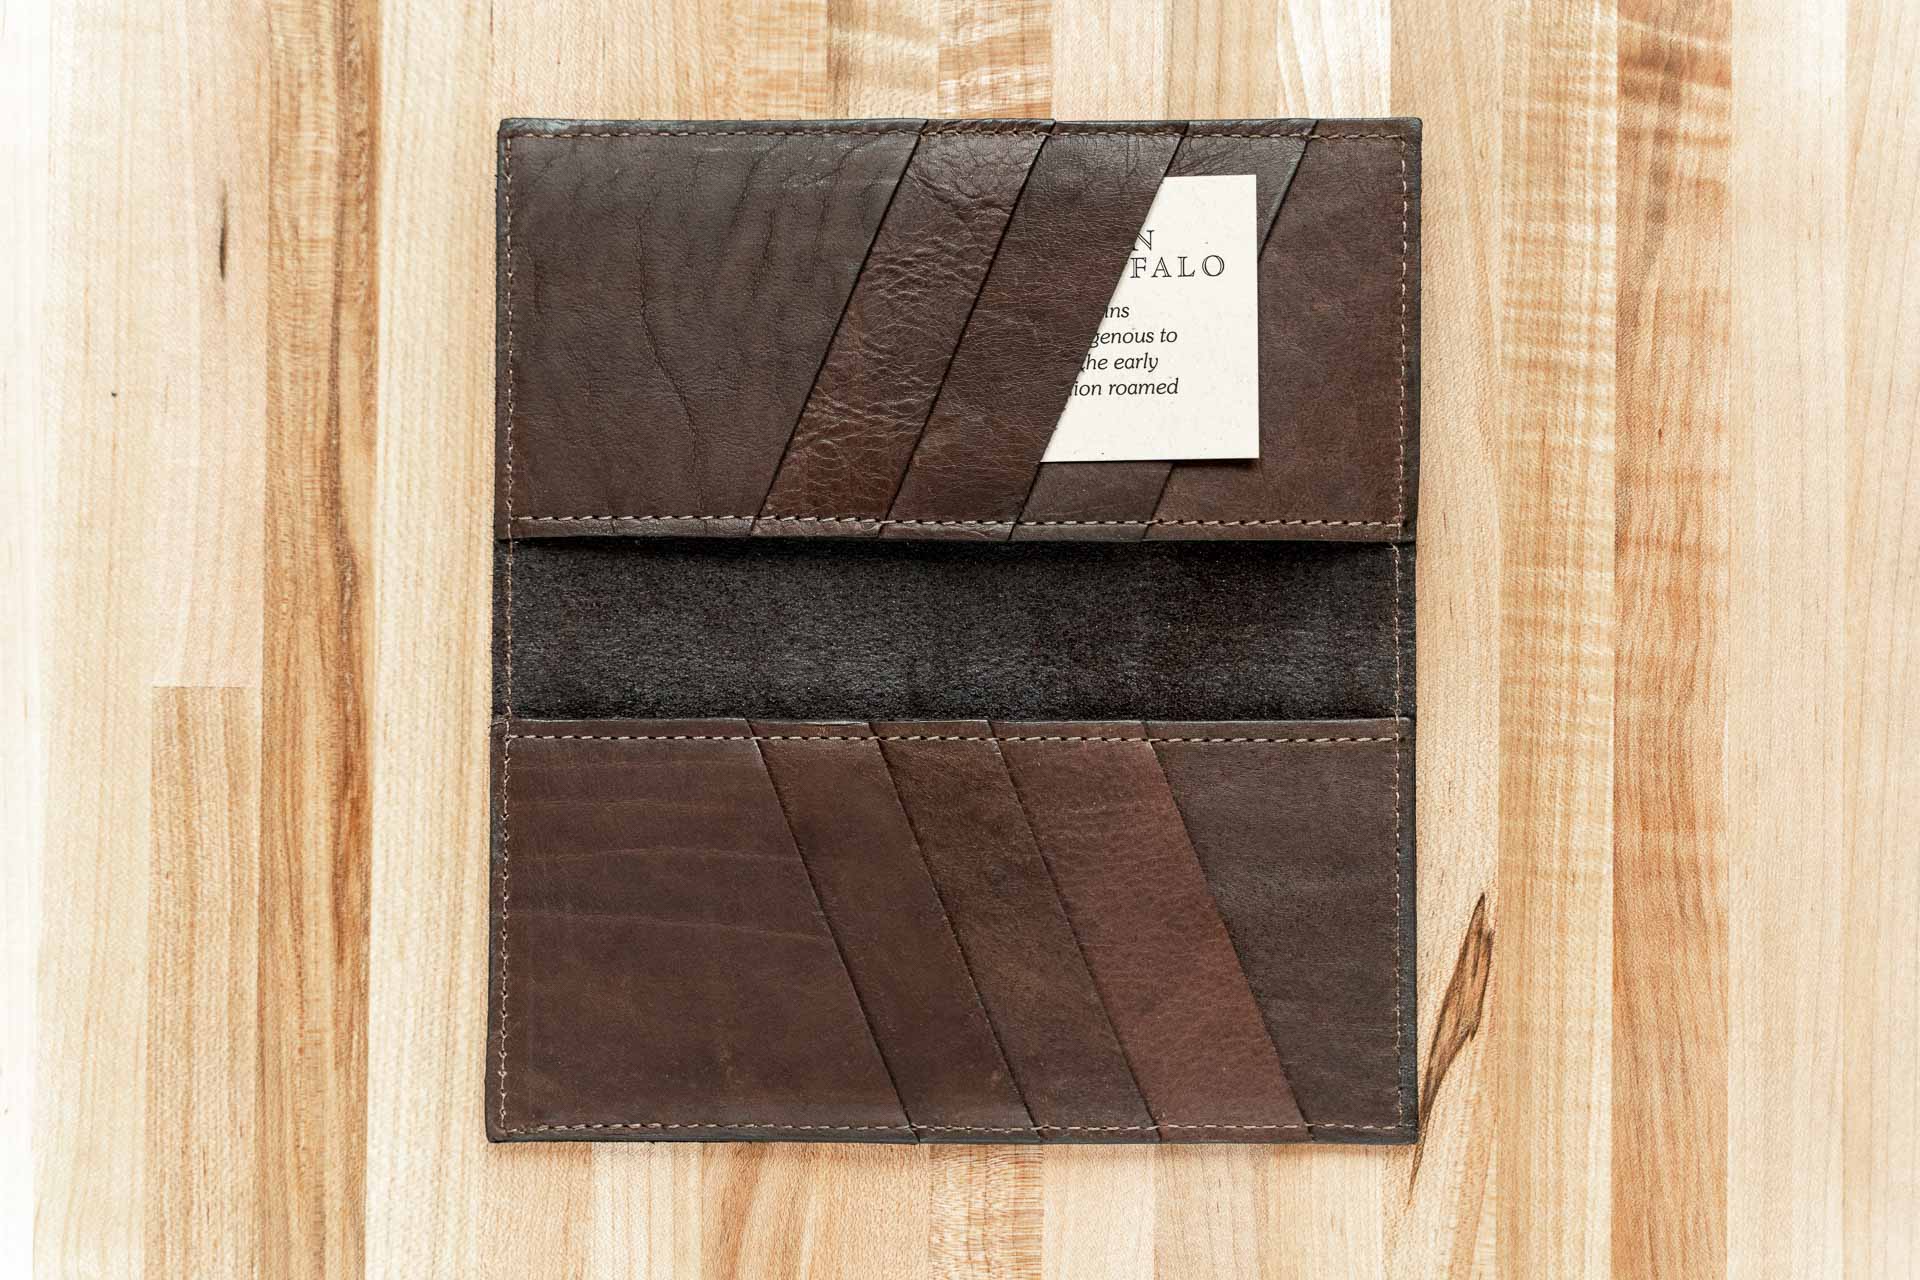 Cowboy Leather Wallet - Inside Credit Card Pockets and Bill Slots